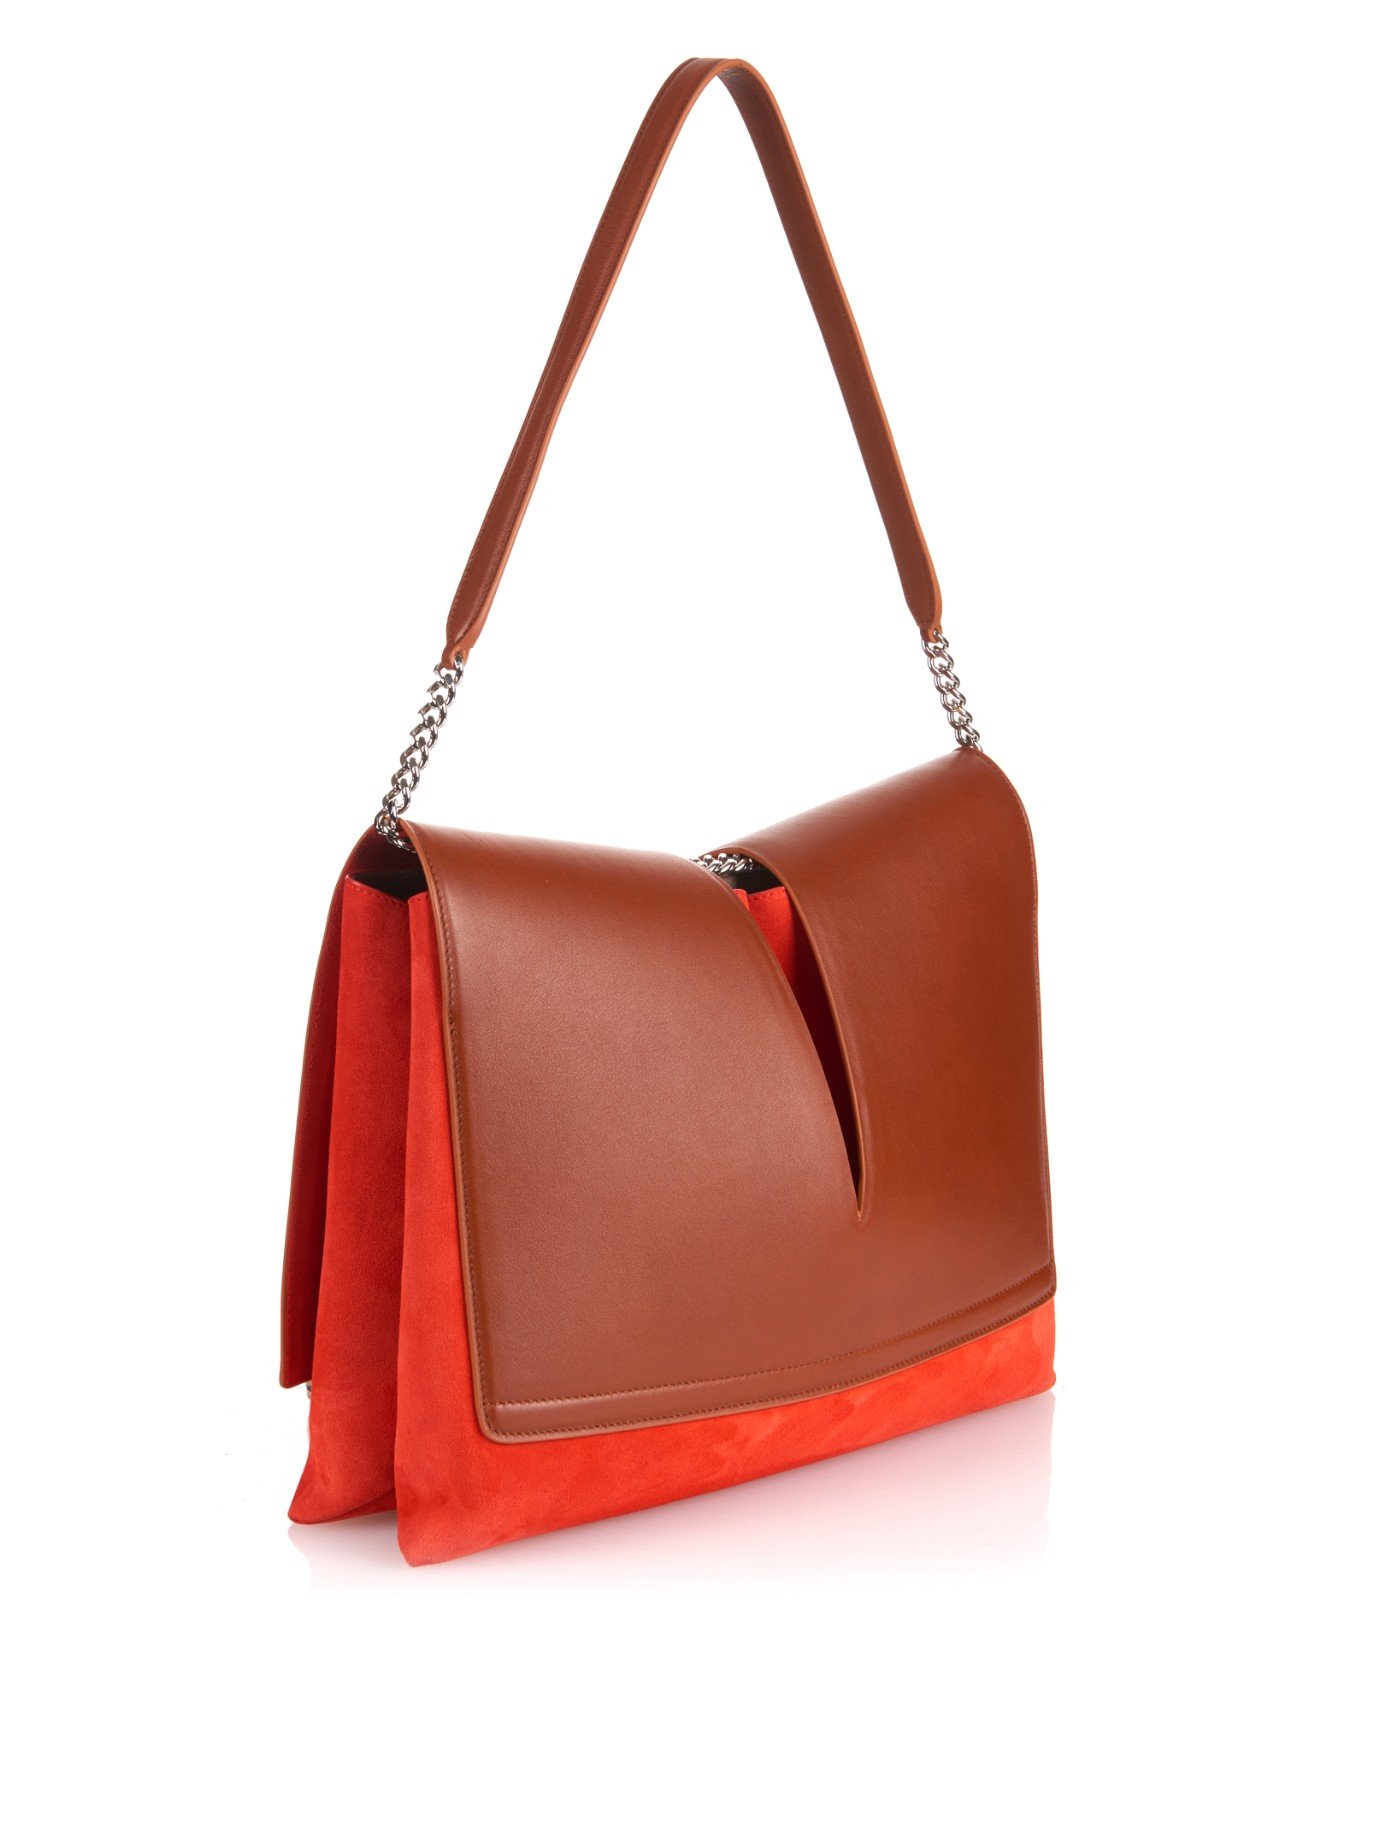 Jil Sander View Suede And Leather Shoulder Bag in Red | Lyst